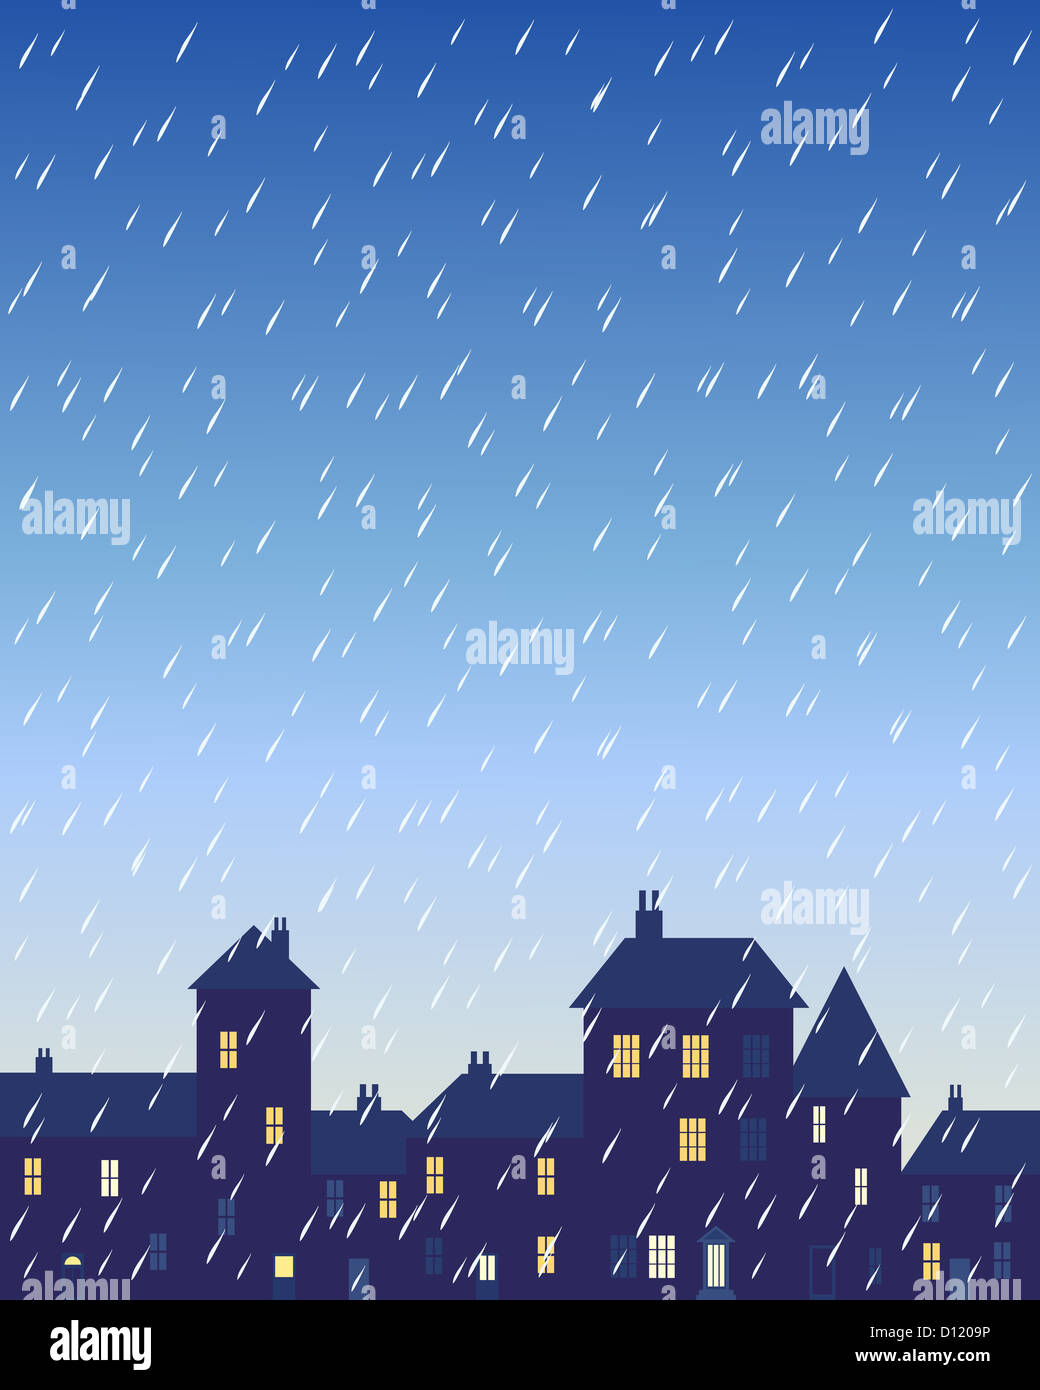 an illustration of a rainy day in a city with various shaped buildings and houses with lighted windows under a stormy sky Stock Photo